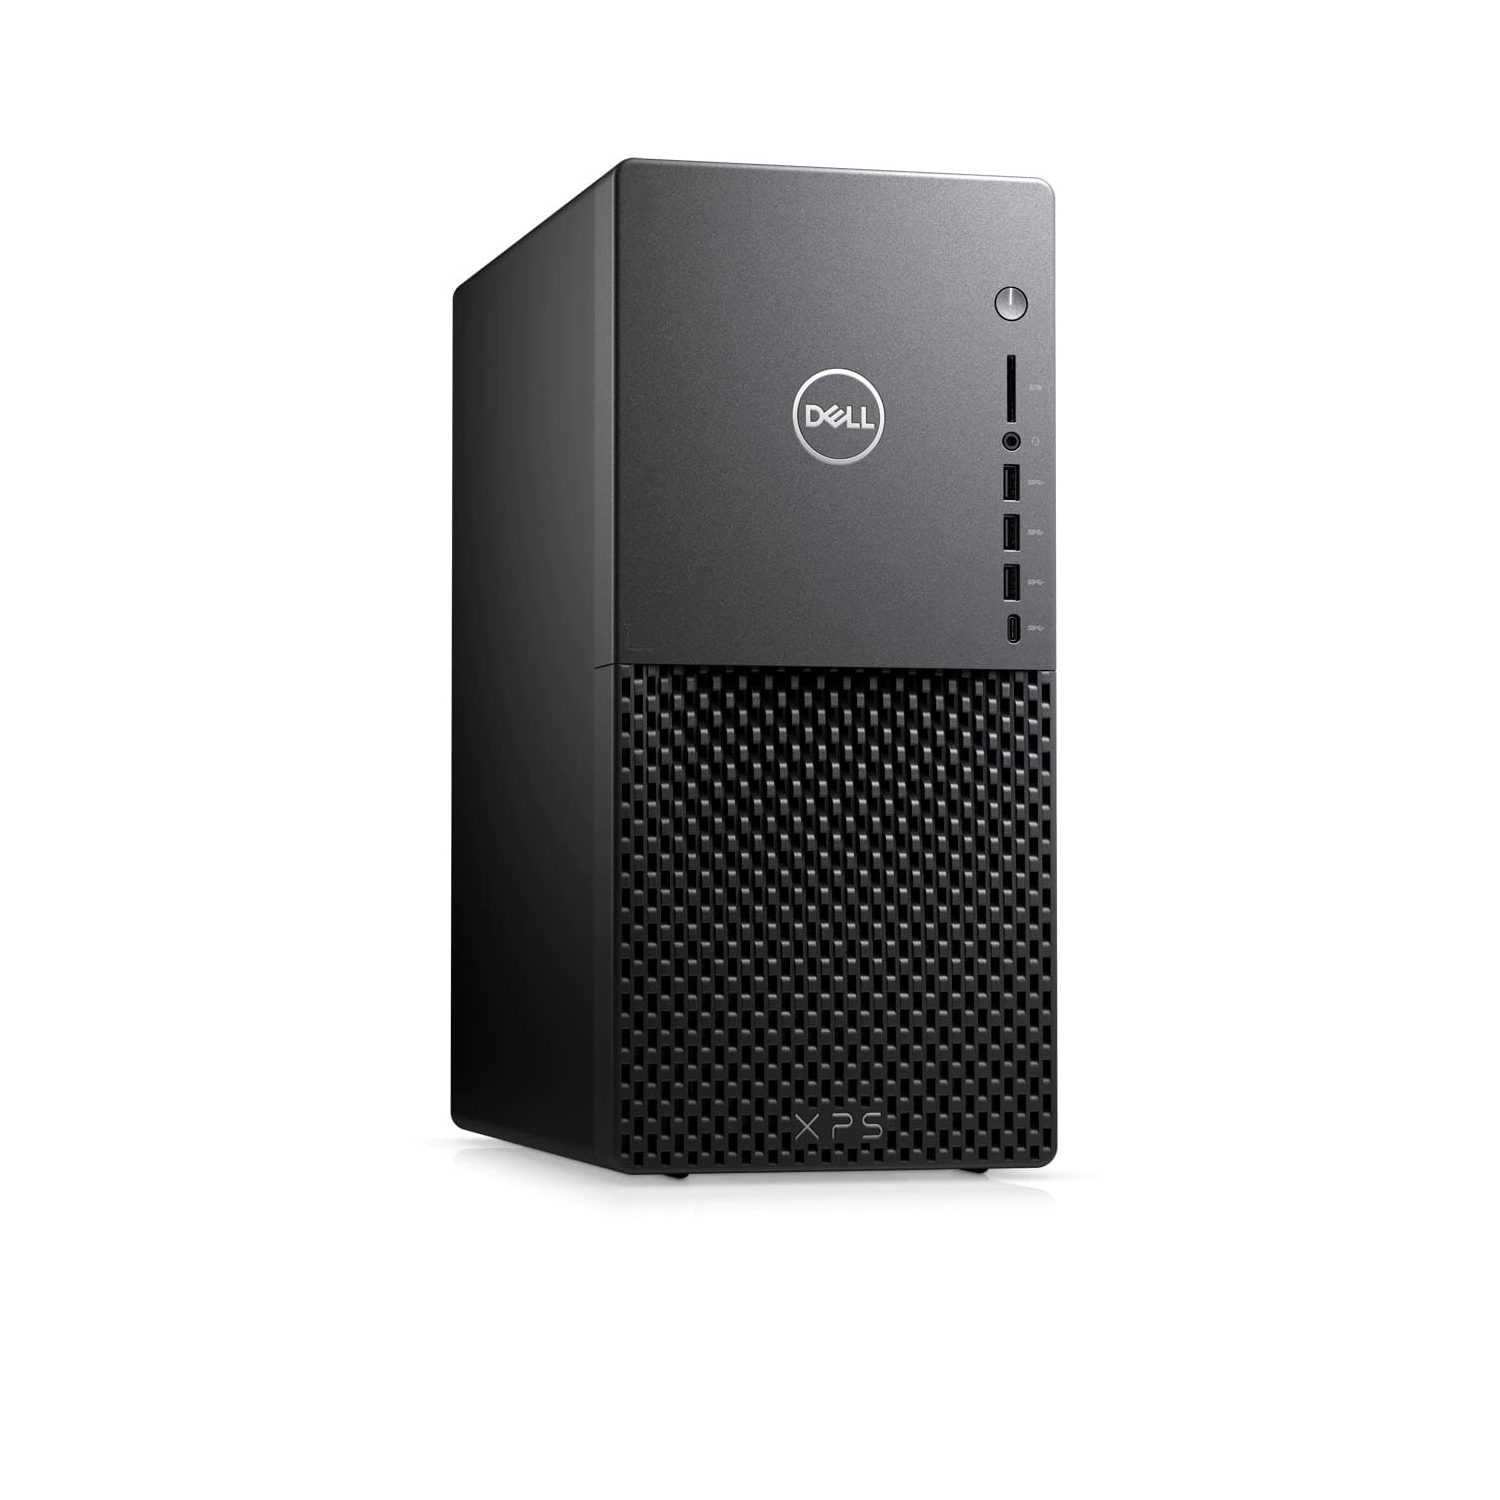 Refurbished (Excellent) - Dell XPS 8940 Desktop (2020) | Core i7 - 1TB SSD - 32GB RAM - 1660 Ti | 8 Cores @ 5 GHz - 11th Gen CPU Certified Refurbished